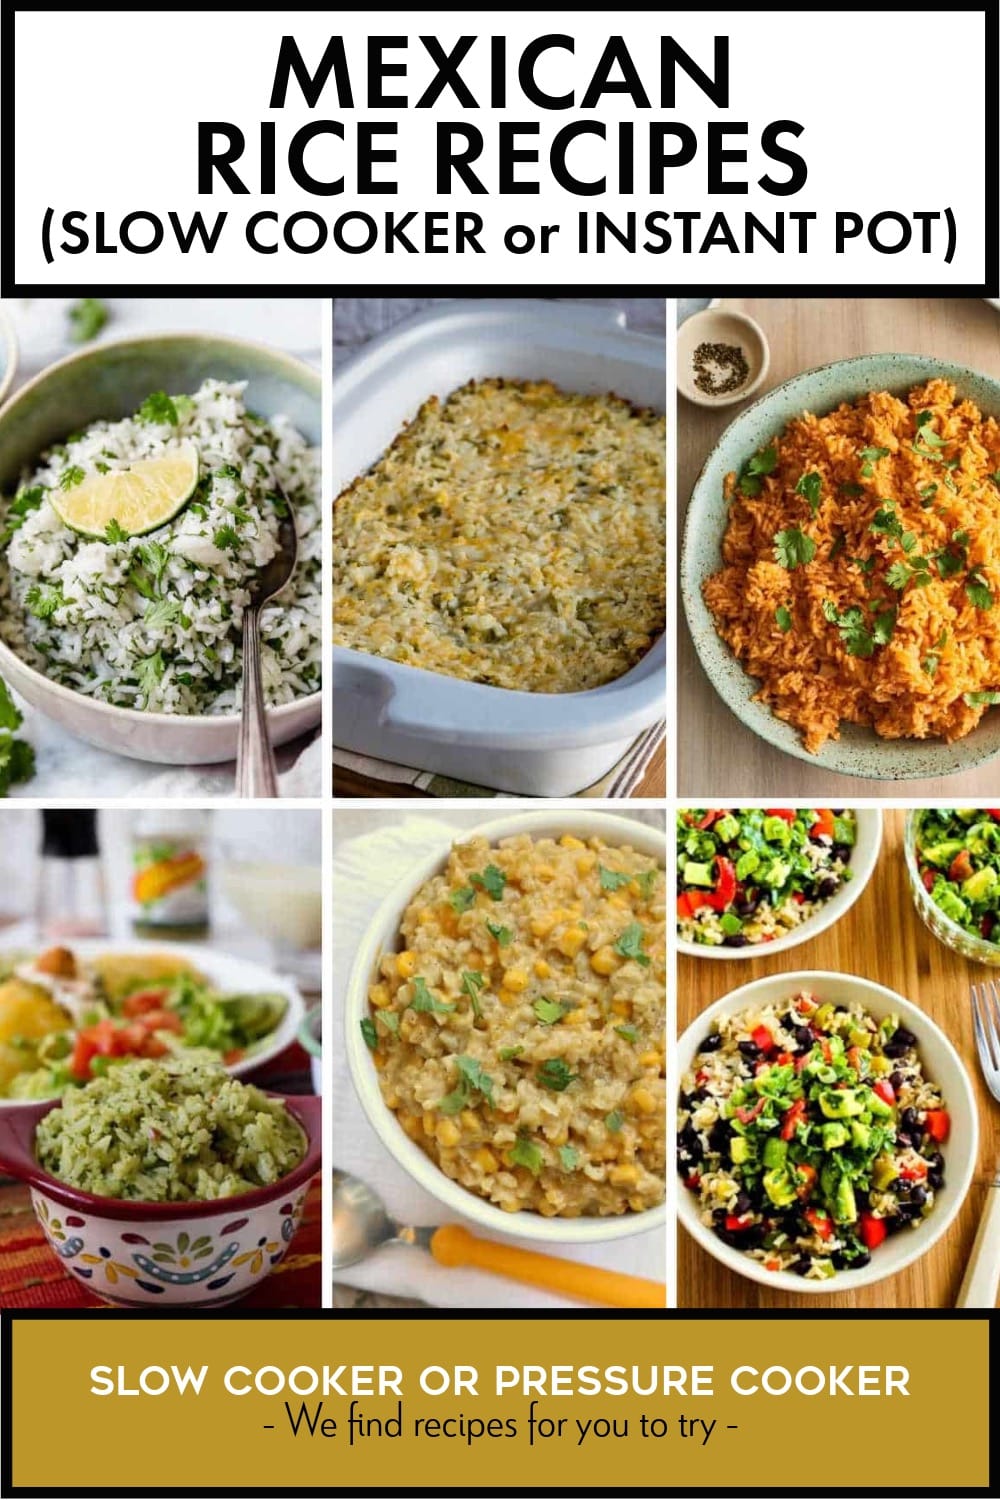 Pinterest image of Mexican Rice Recipes